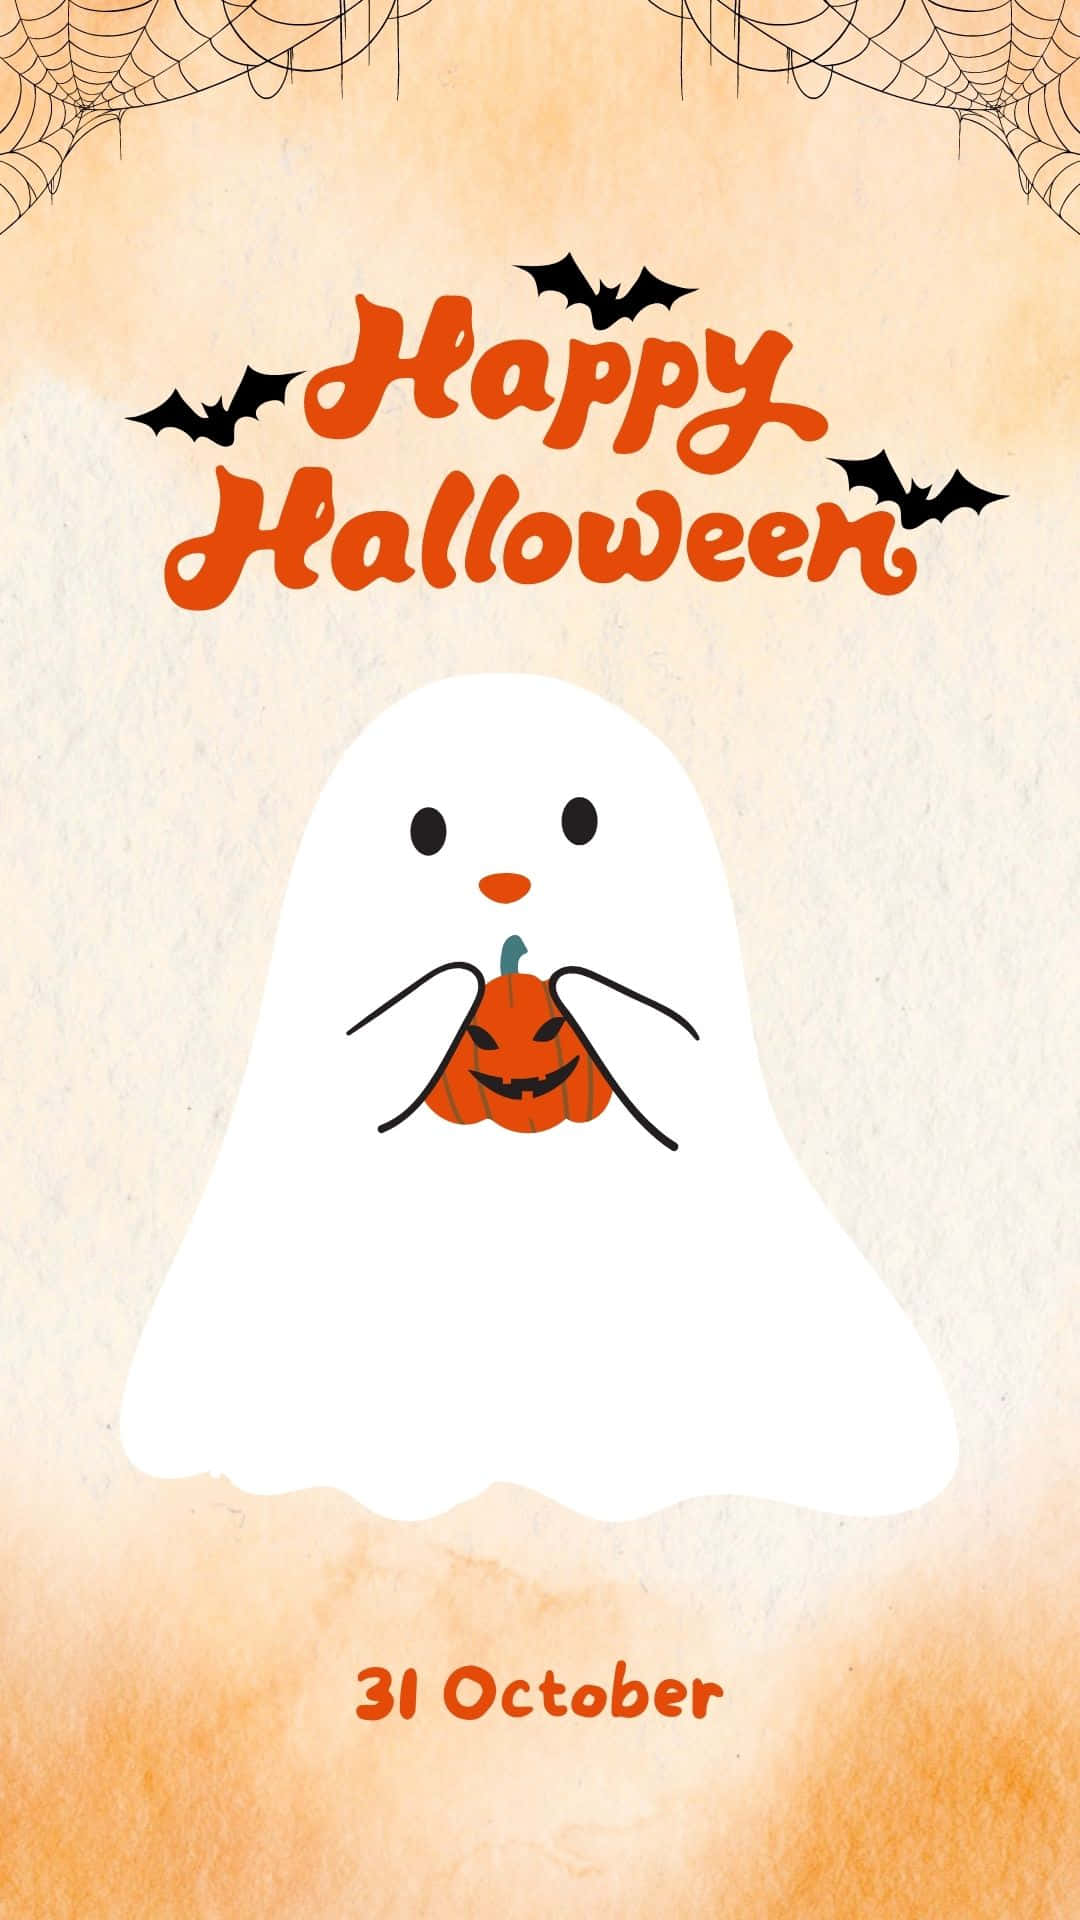 October 31st - Celebrate Halloween with your family Wallpaper